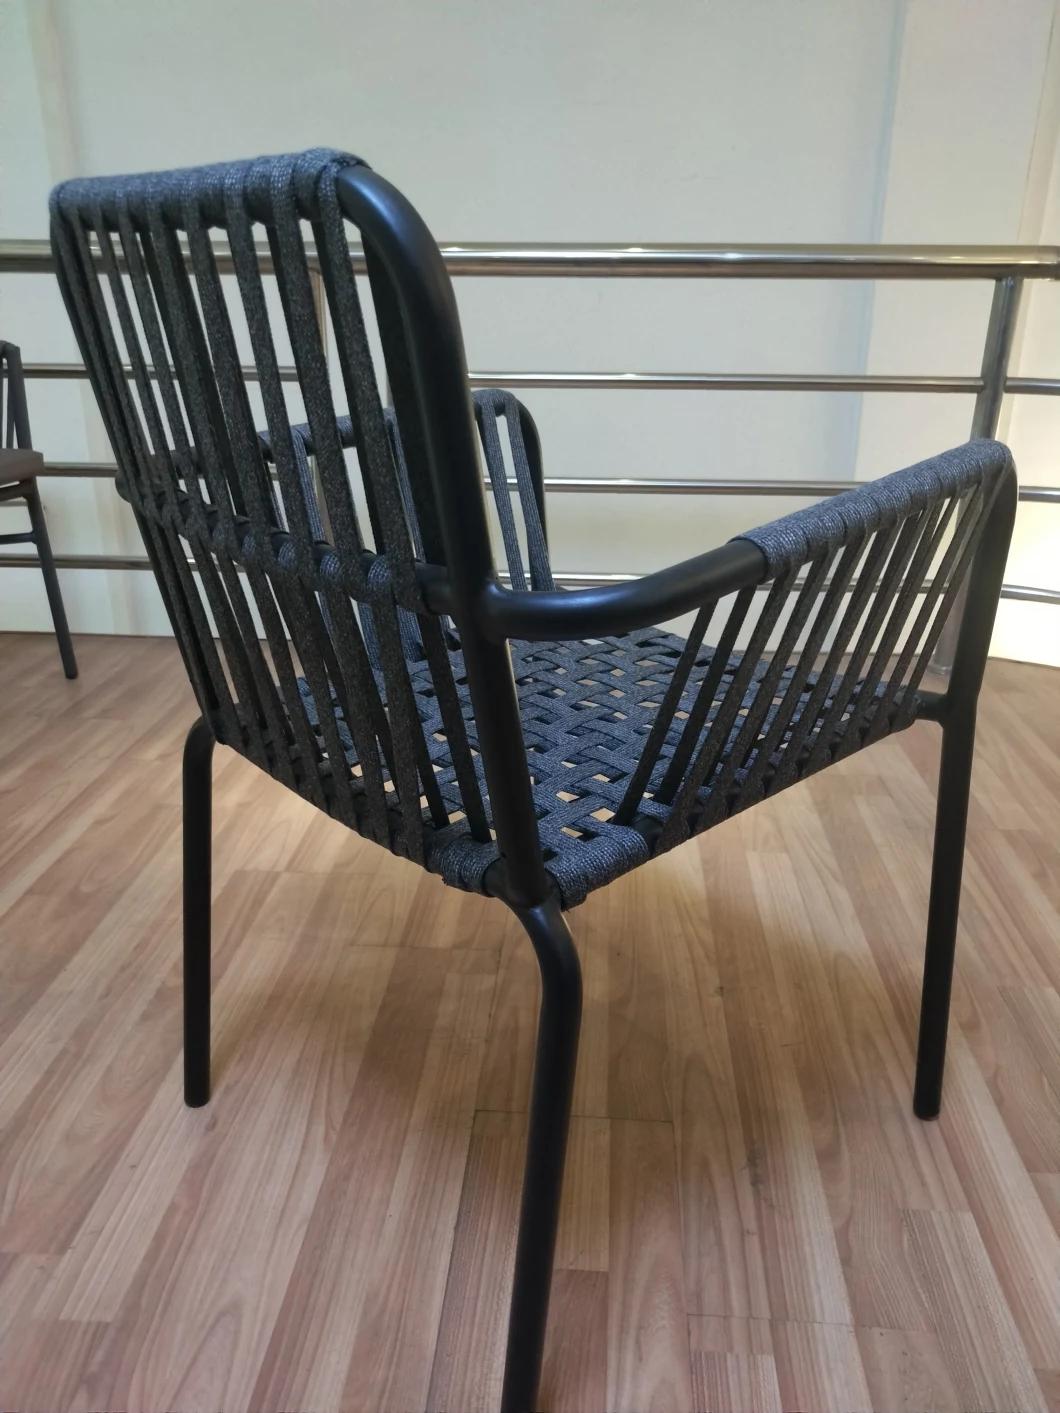 Stylish North Europe Rattan Outdoor Furniture Used Restaurant Dining Furniture Outdoor Arm Chair